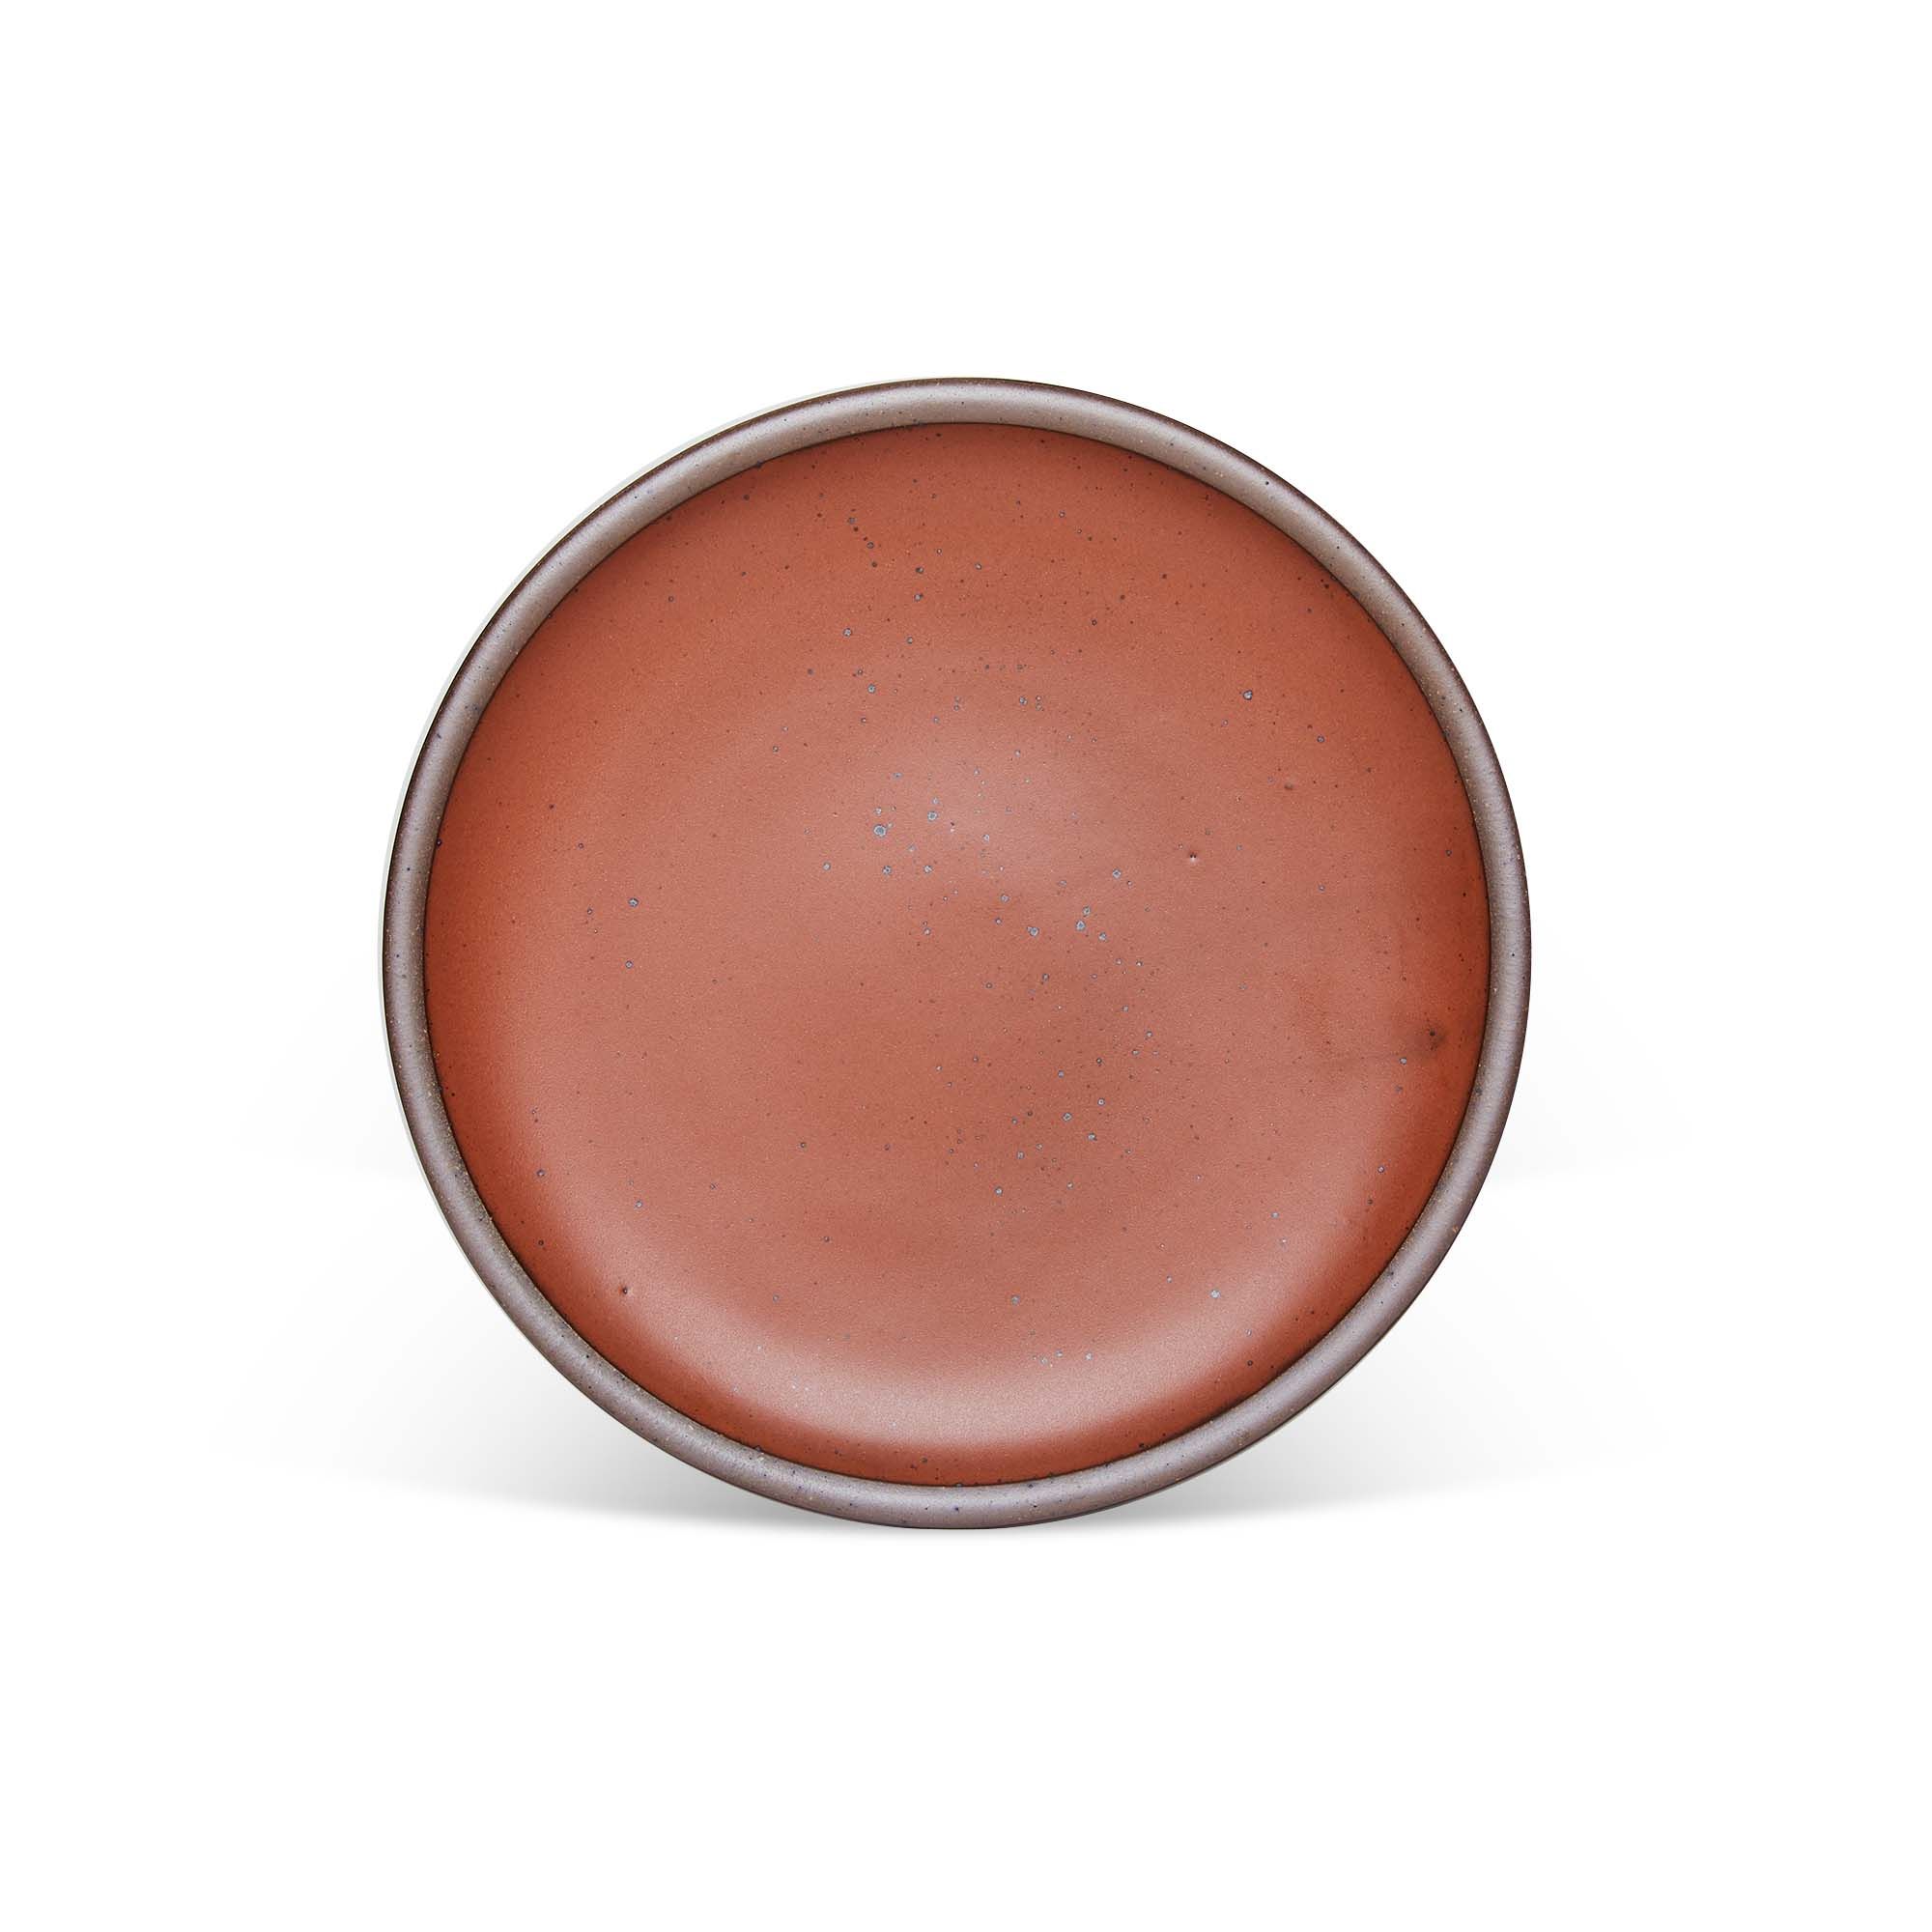 A dinner sized ceramic plate in a cool burnt terracotta color featuring iron speckles and an unglazed rim